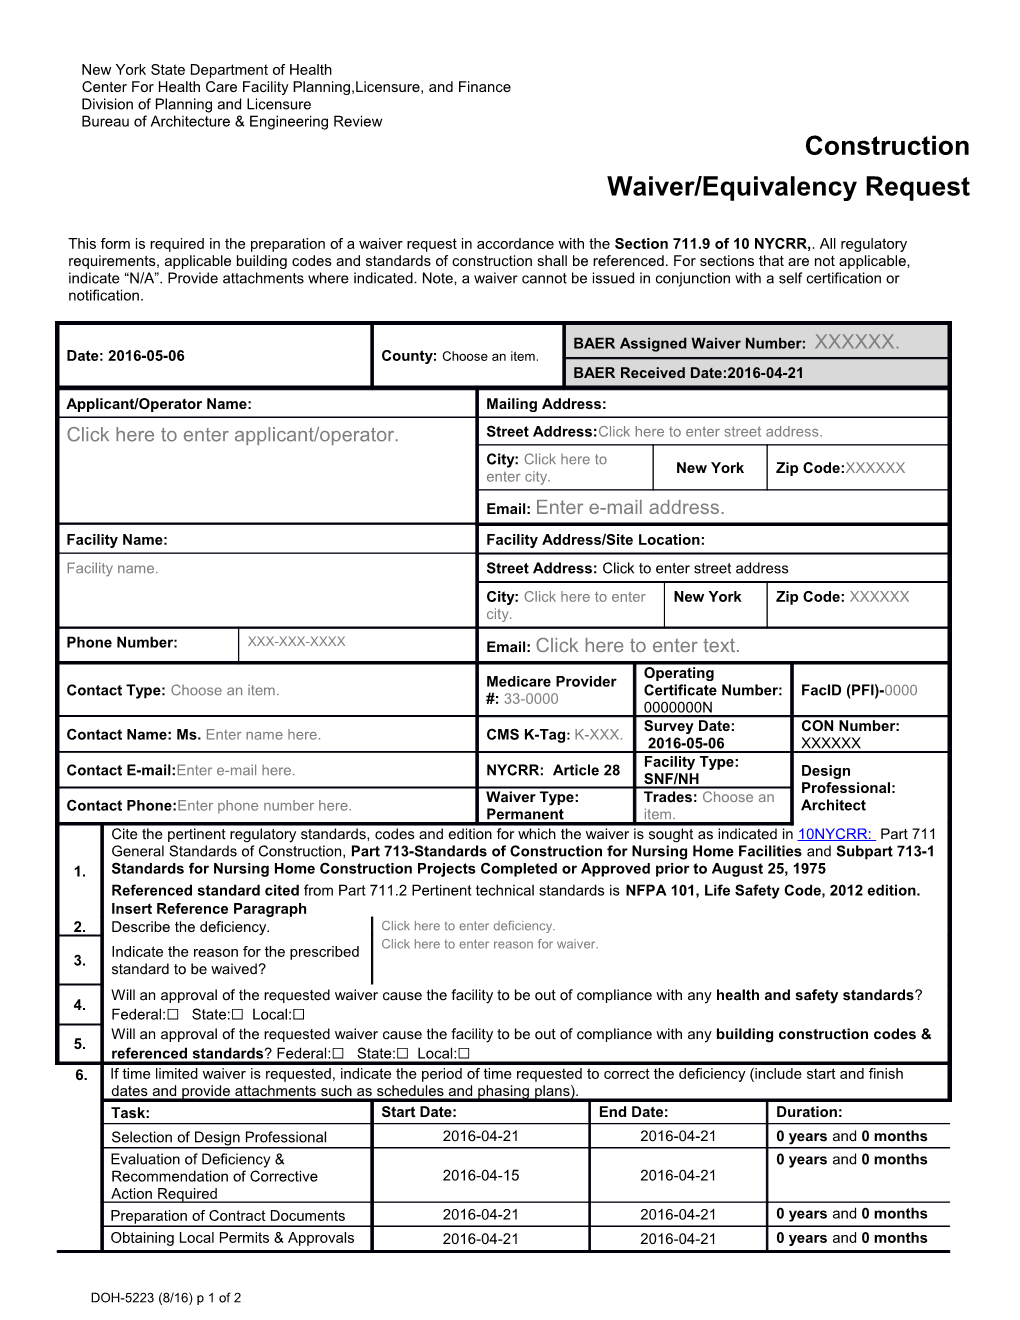 Code Compliance Review Form: NYS Building Code